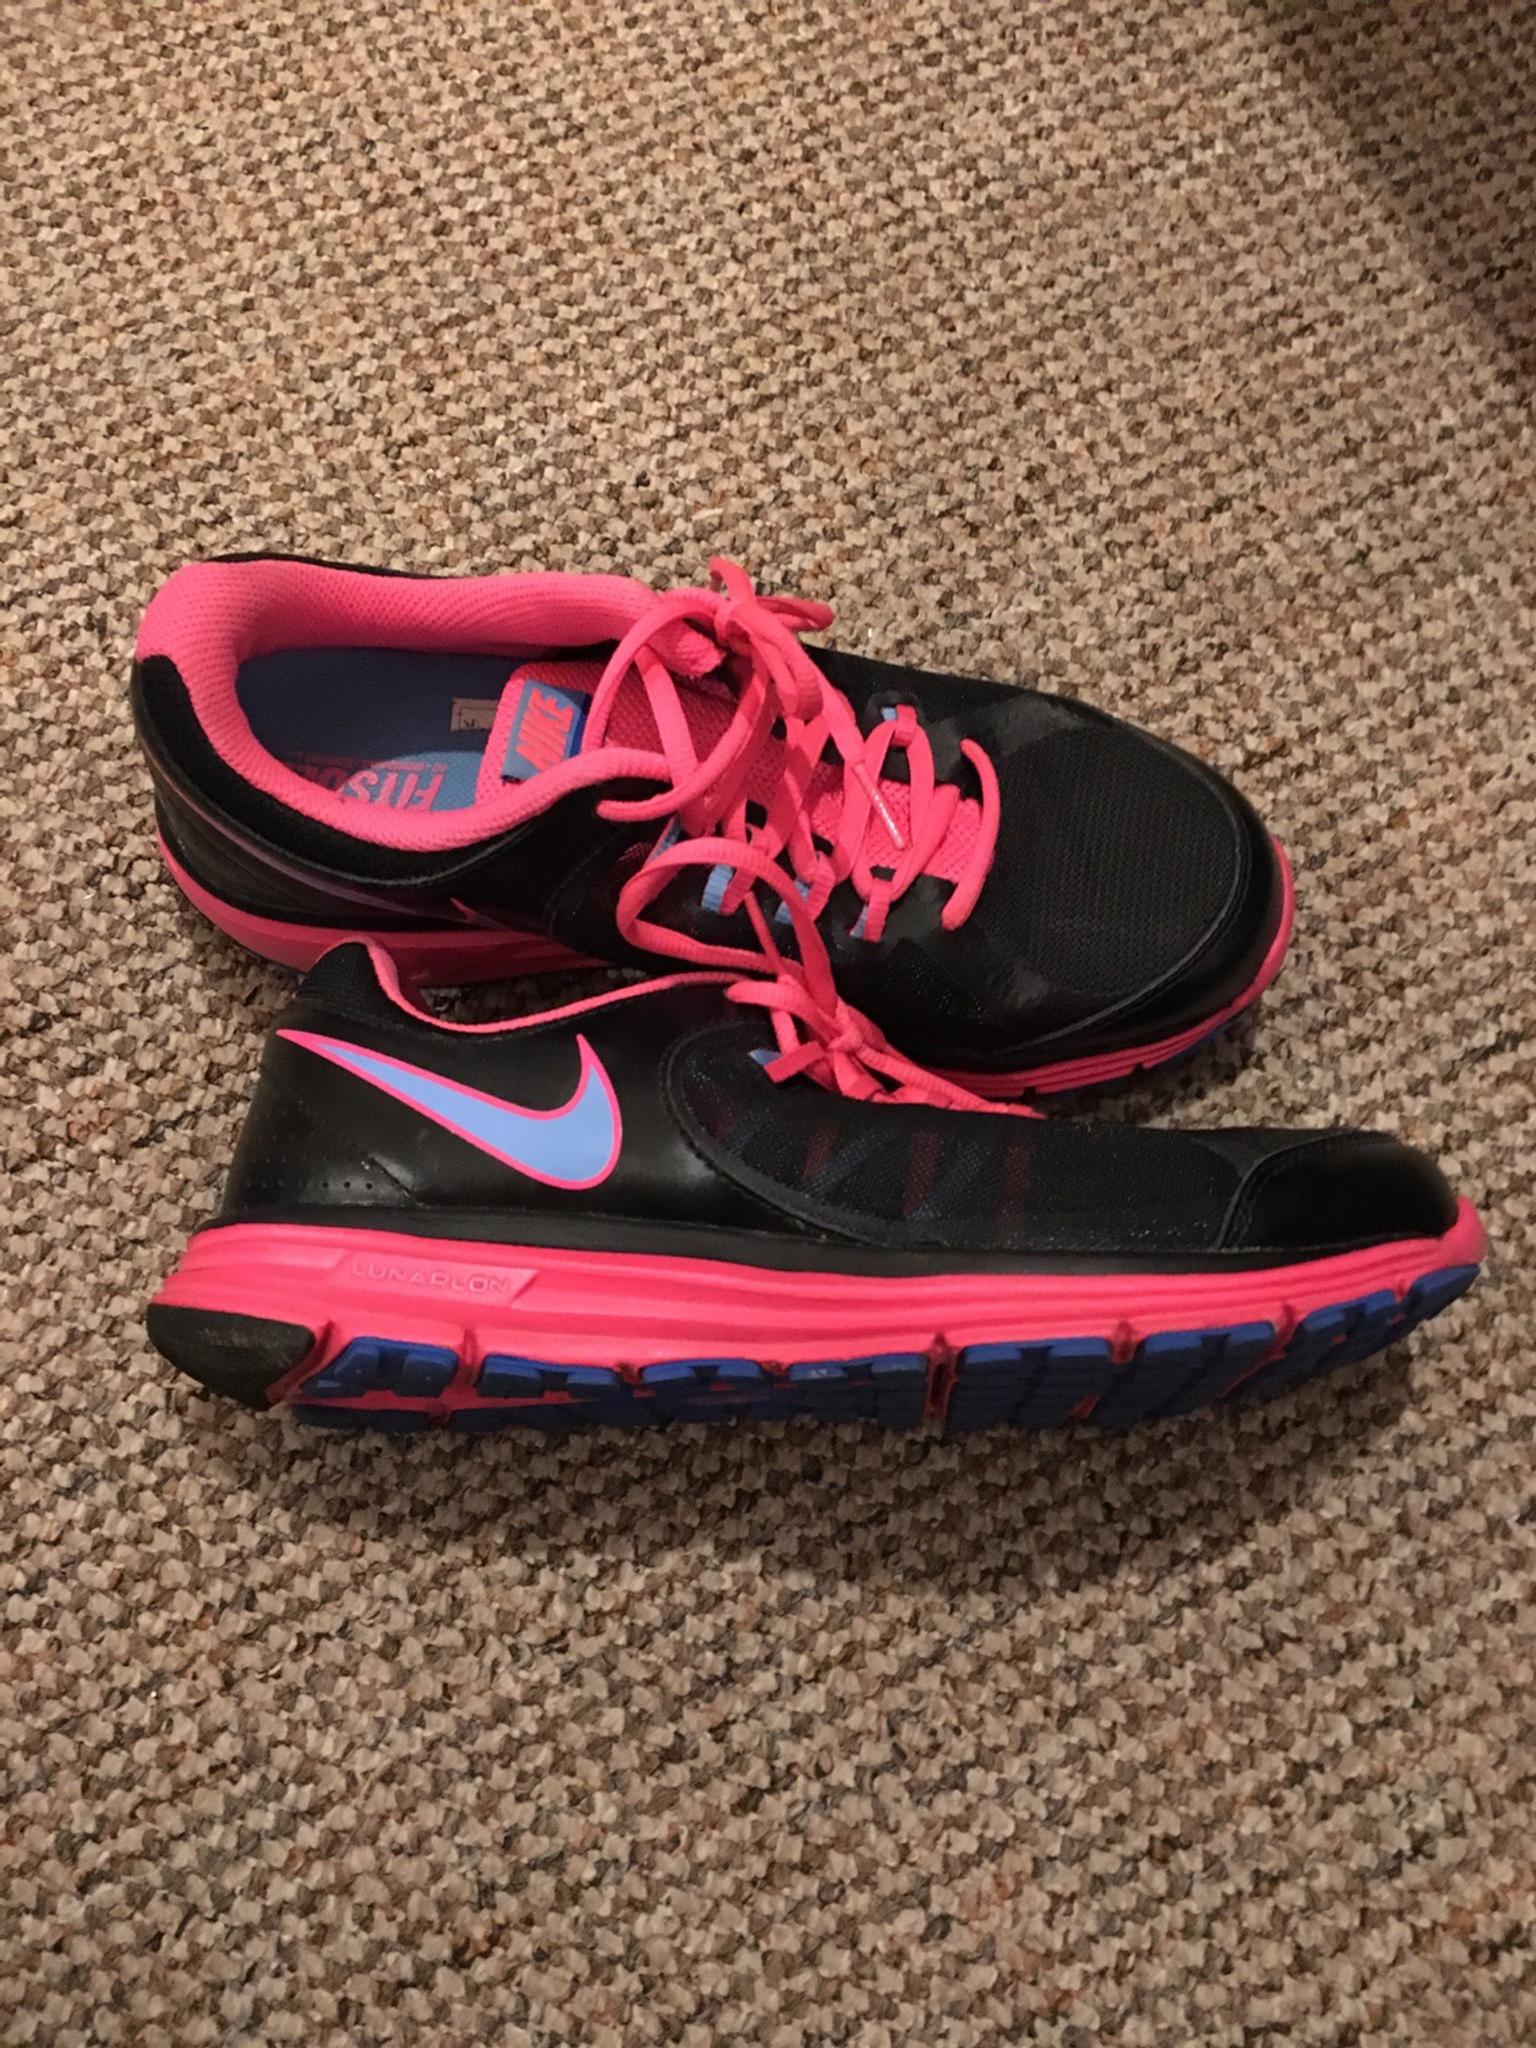 black and pink nikes